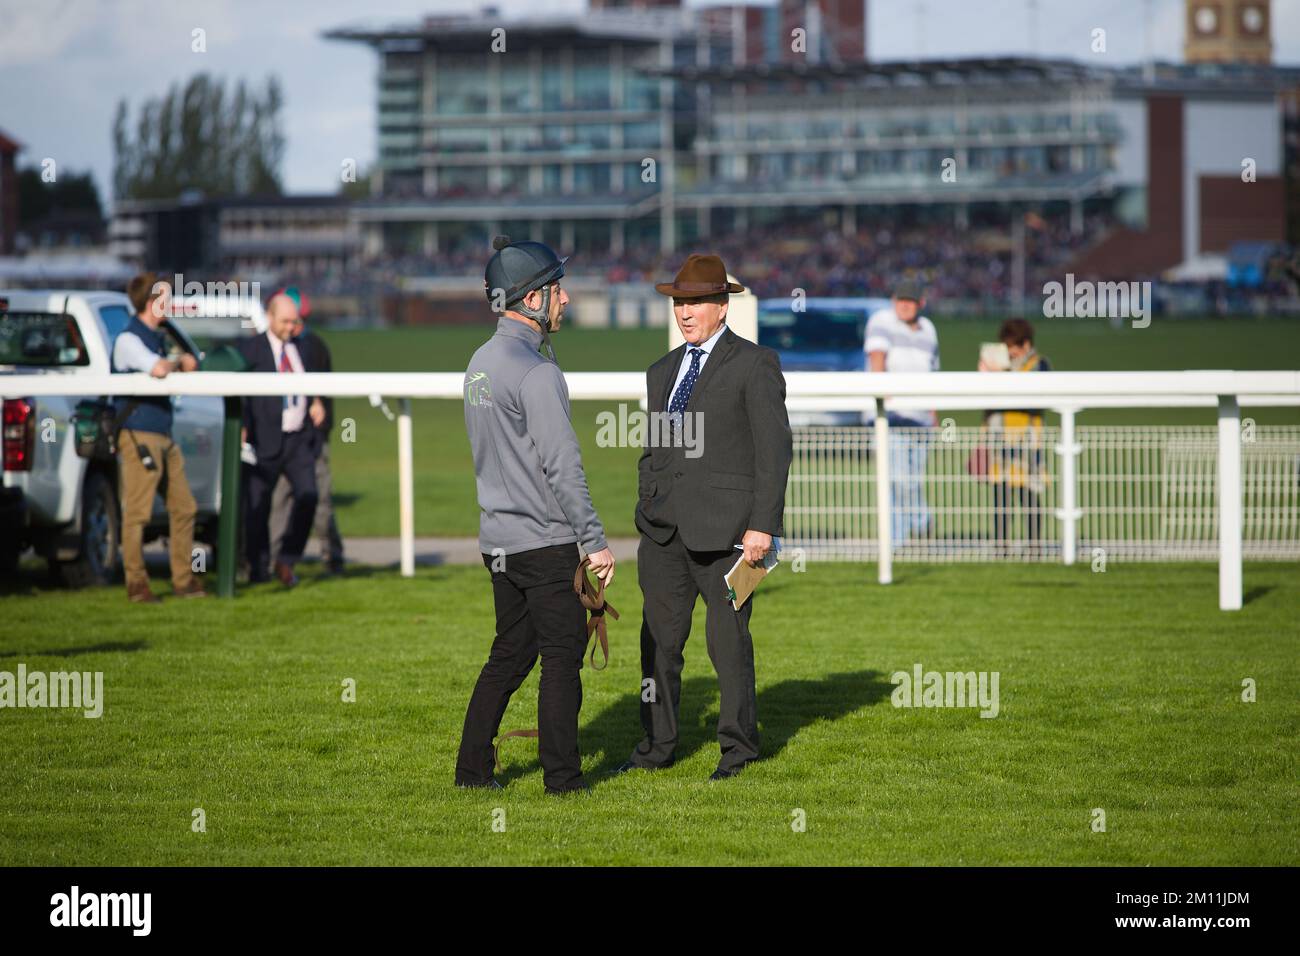 Racecourse staff chatting before the jockeys and their horses arrive at the starting gates at York Races. Stock Photo